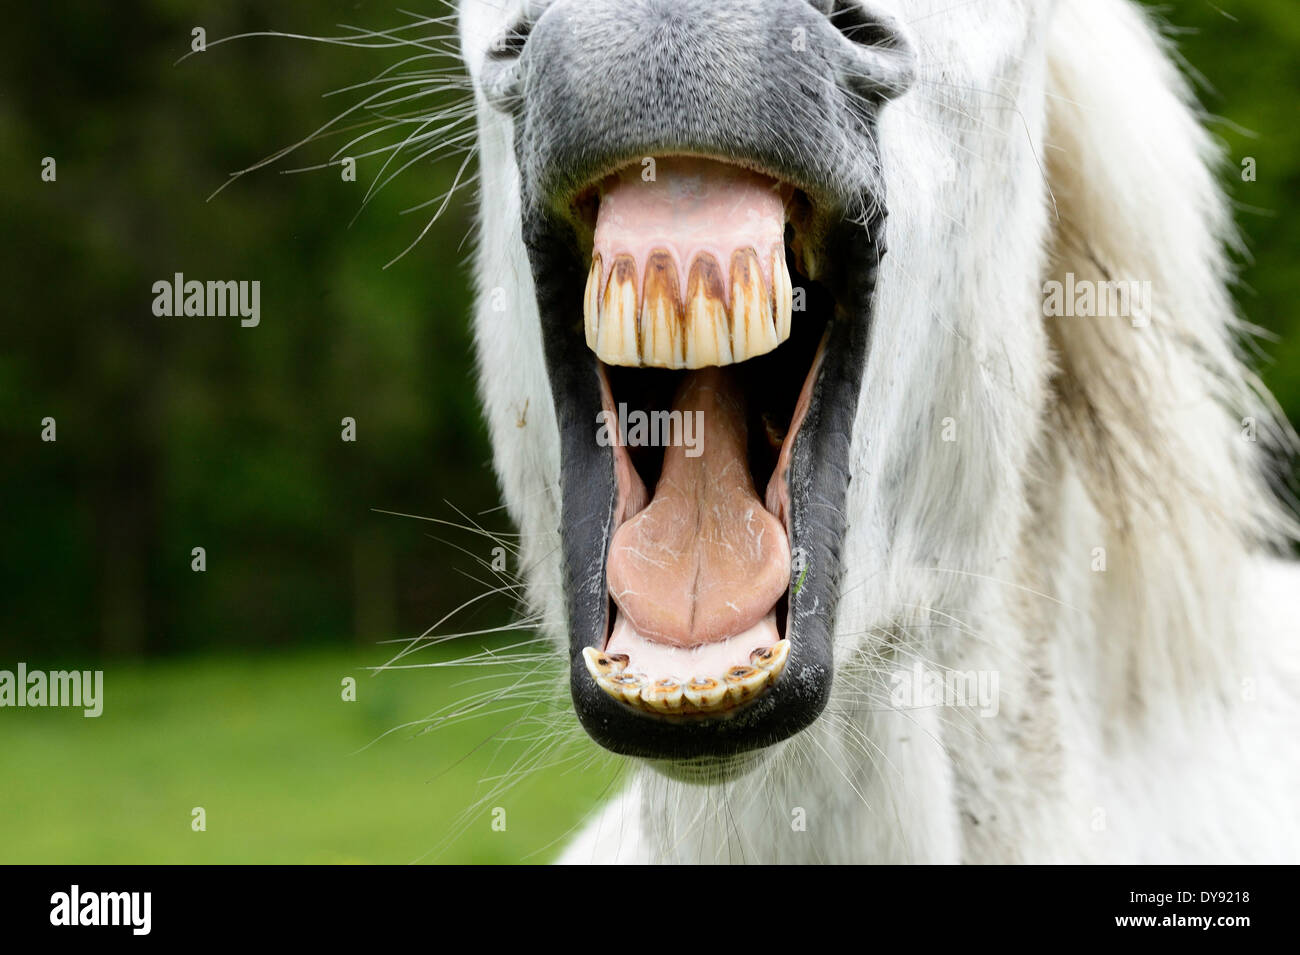 Laughing horse, horse, white horse, horse teeth, teeth, laughing, neigh, laugh, animal, animals, Germany, Europe, Stock Photo